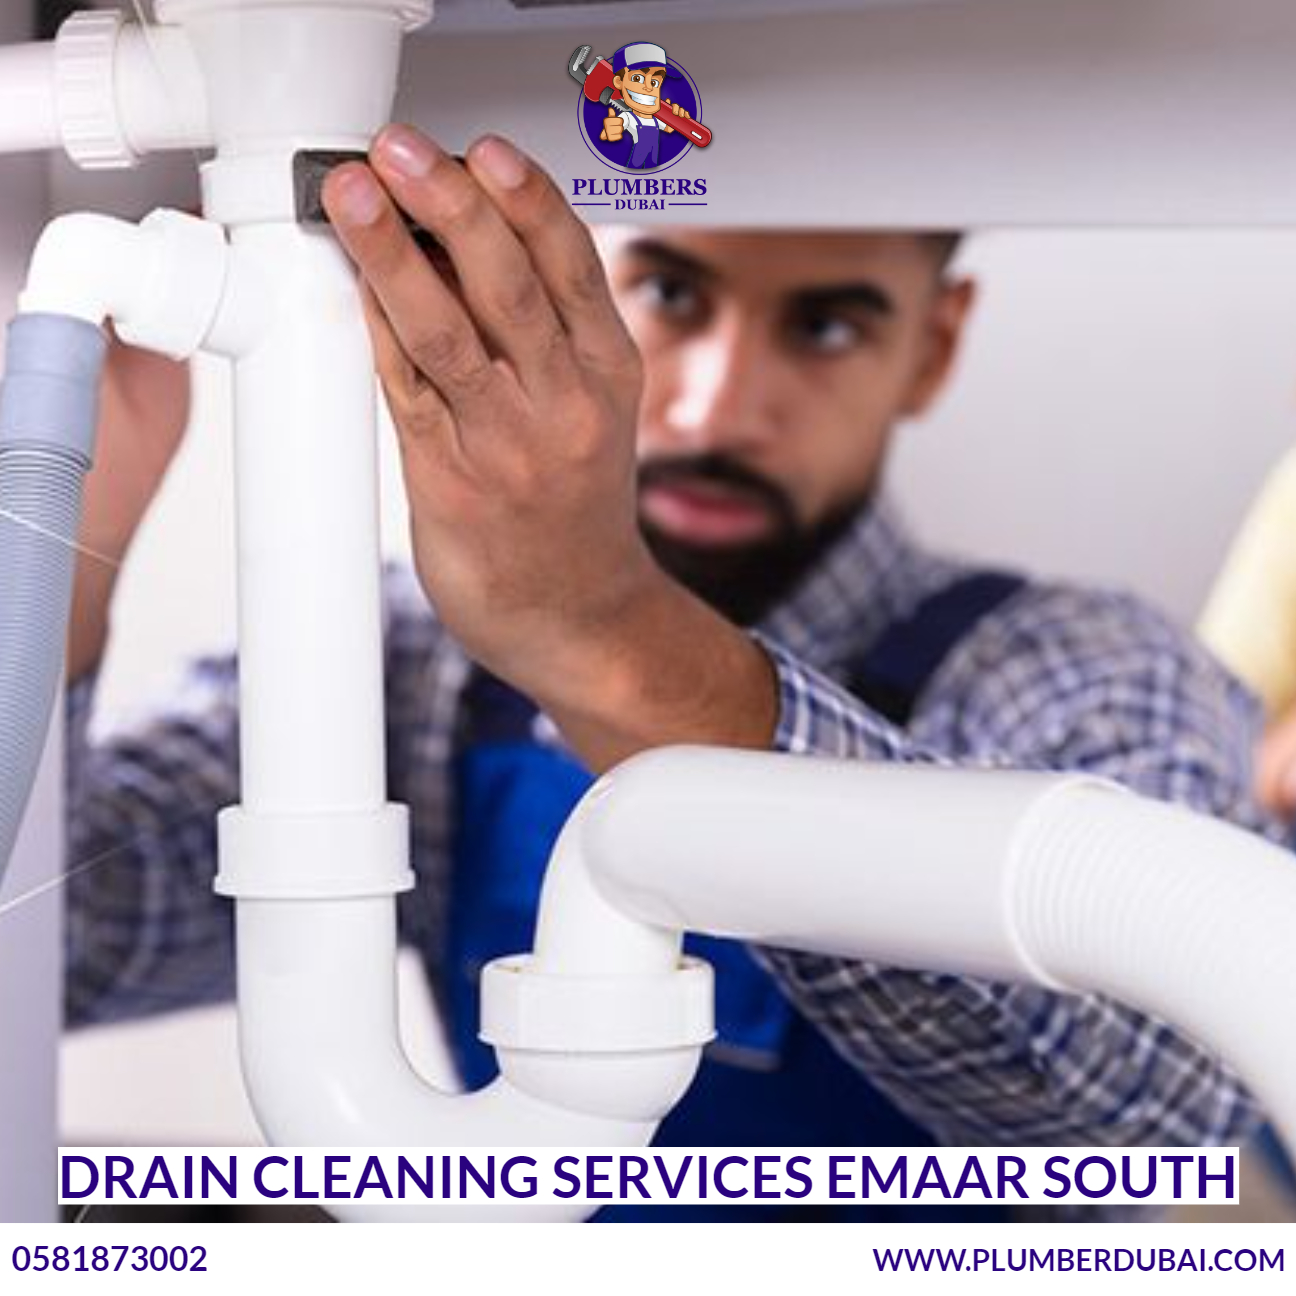 Drain cleaning services Emaar south